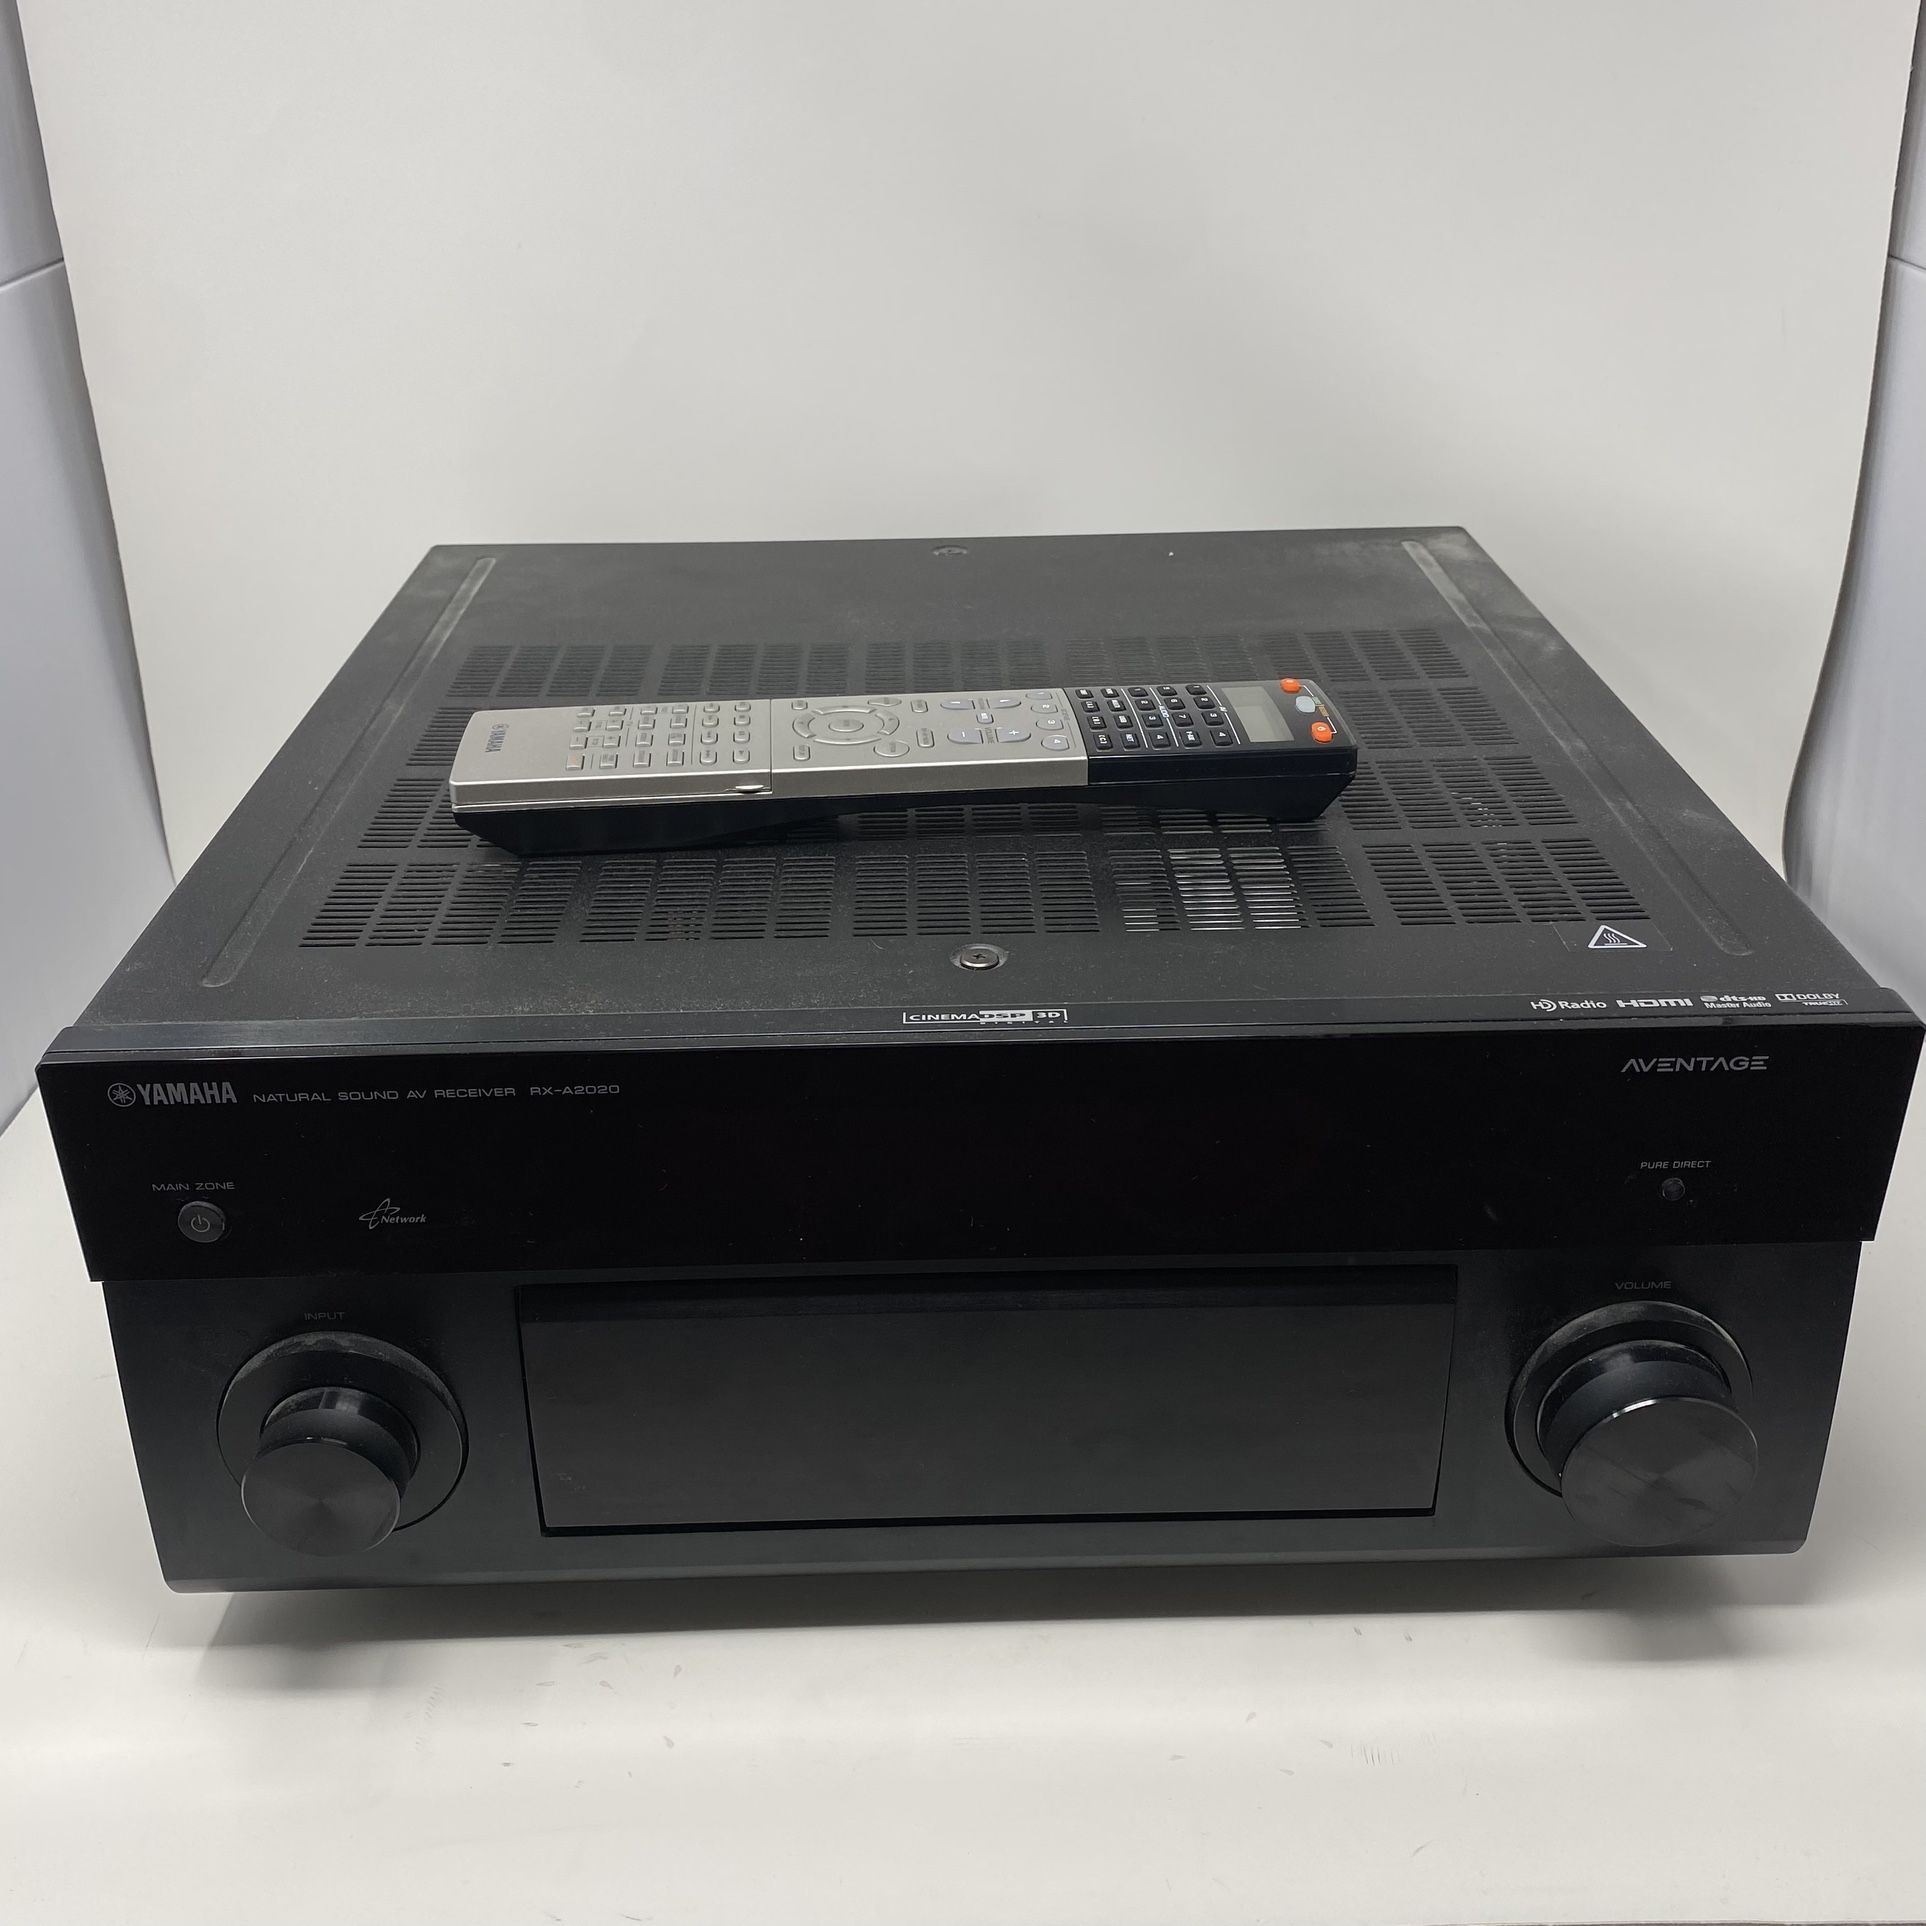 Yamaha Stereo Receiver RX-a2020